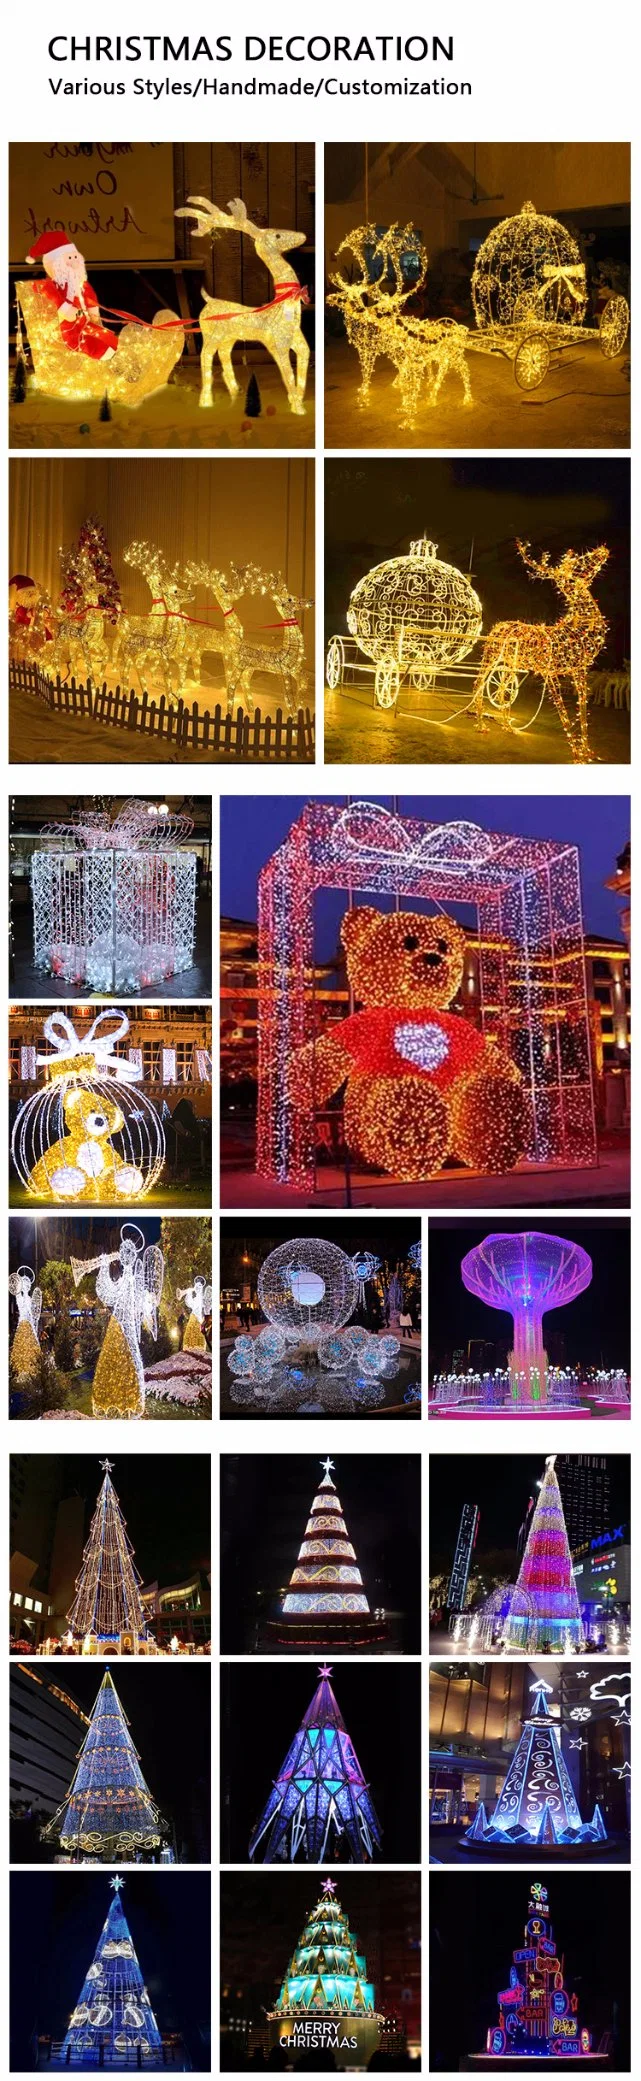 LED Motif Moon Model Lights Christmas Holiday Decoration Lamps Artificial Giant Winter Festival Decorative Street